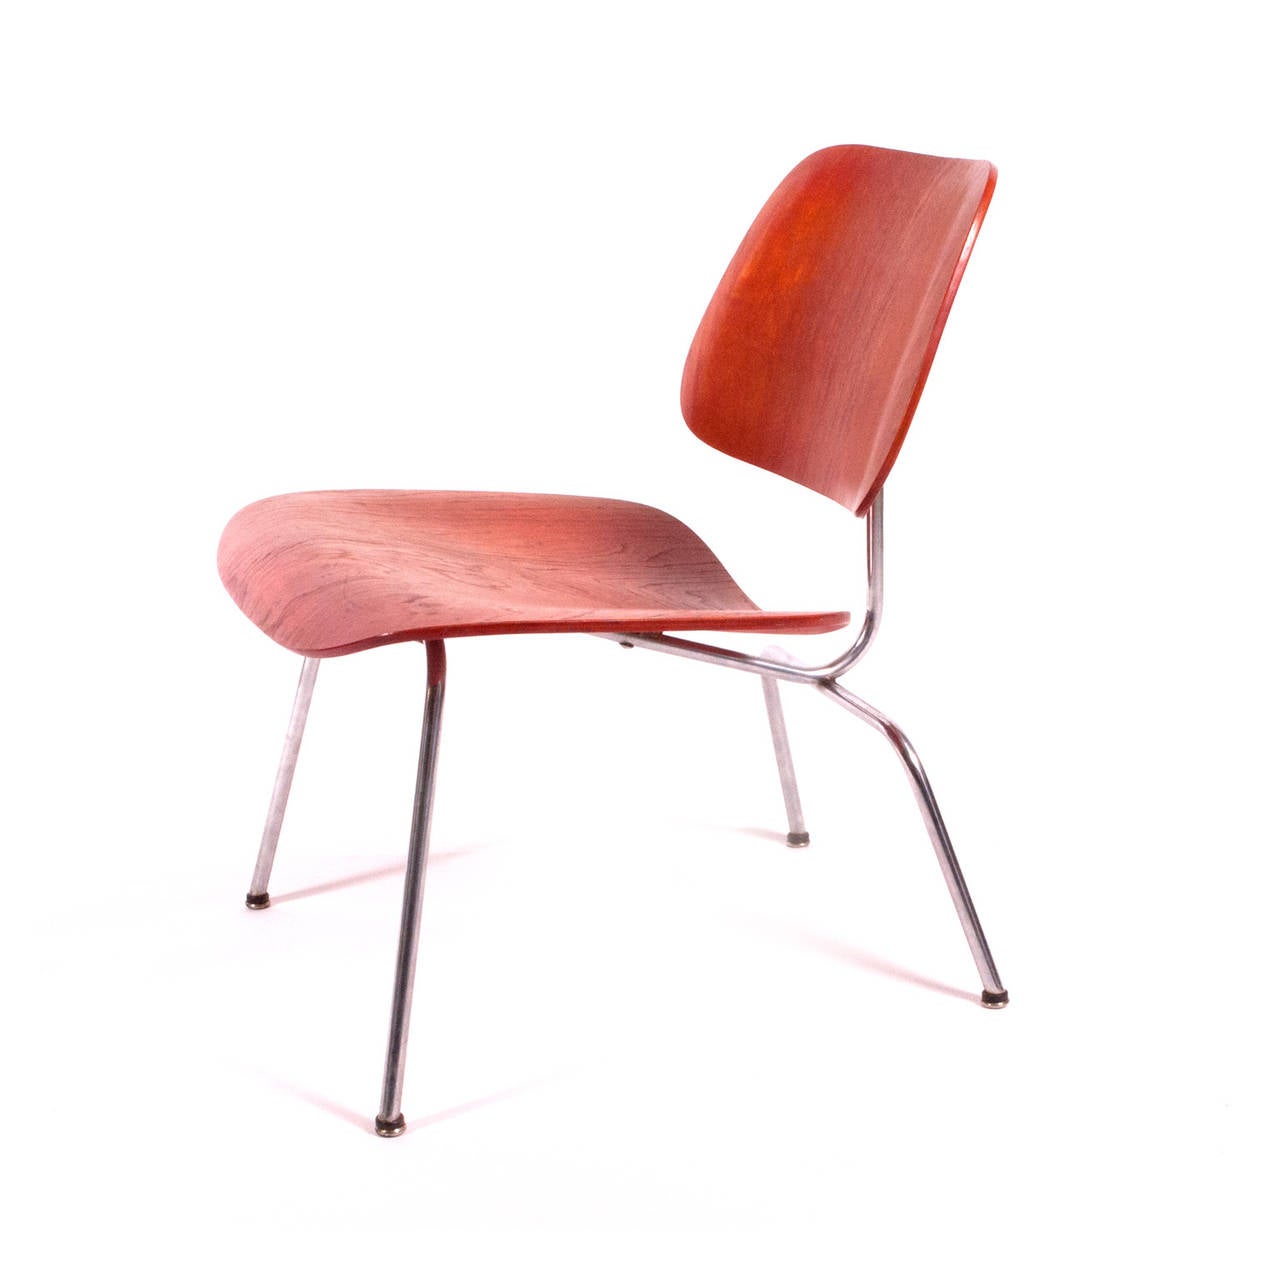 Modern 1951 Original Red Aniline Dyed LCM Chair by Charles Eames